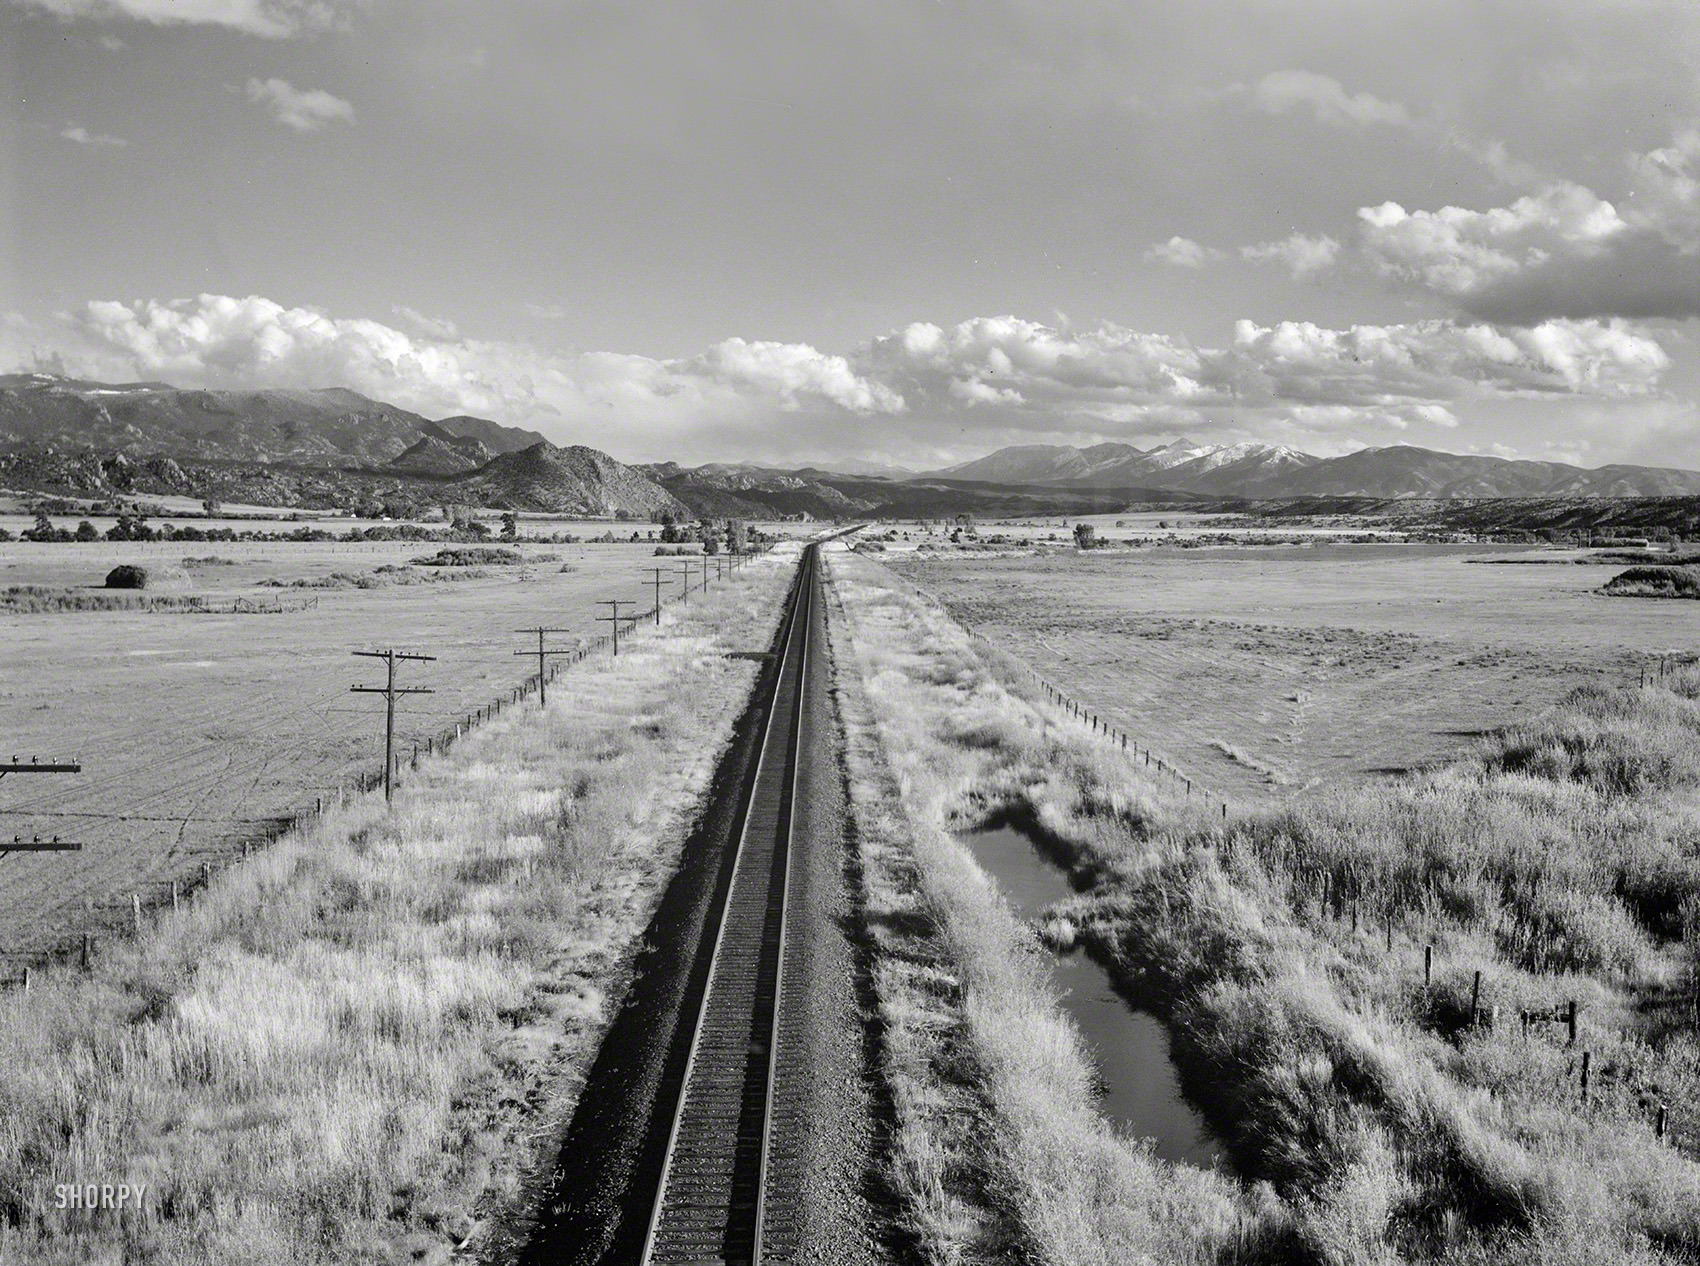 September 1941. "Buena Vista, Colorado (vicinity). The Sawatch mountains." Medium format negative by Marion Post Wolcott. View full size.